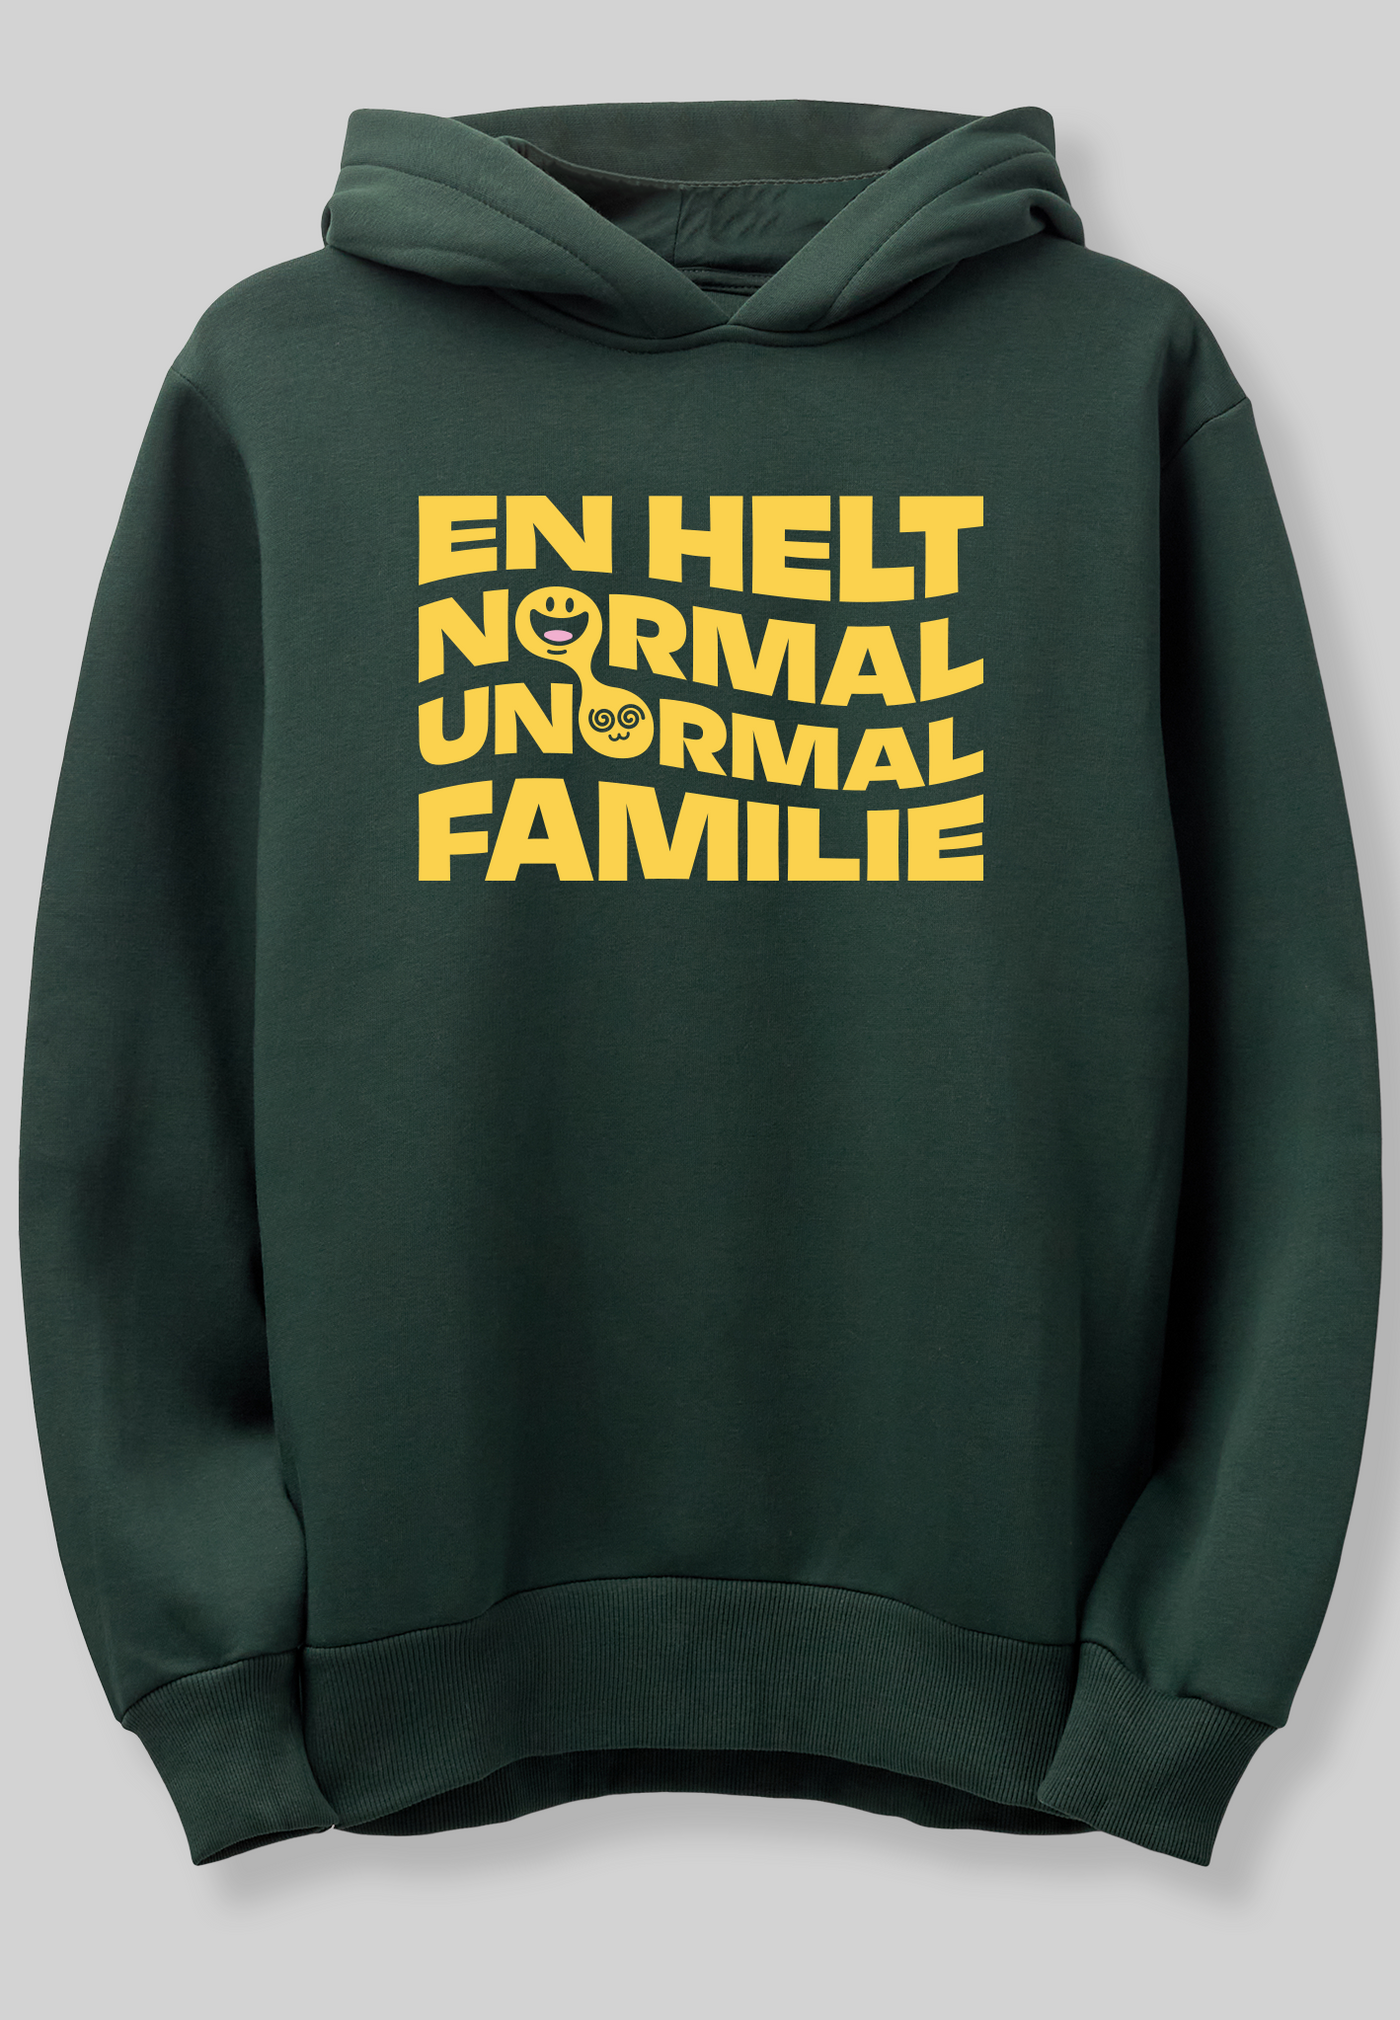 The Münster family - "NORMAL / ABNORMAL FAMILY" - Green hoodie